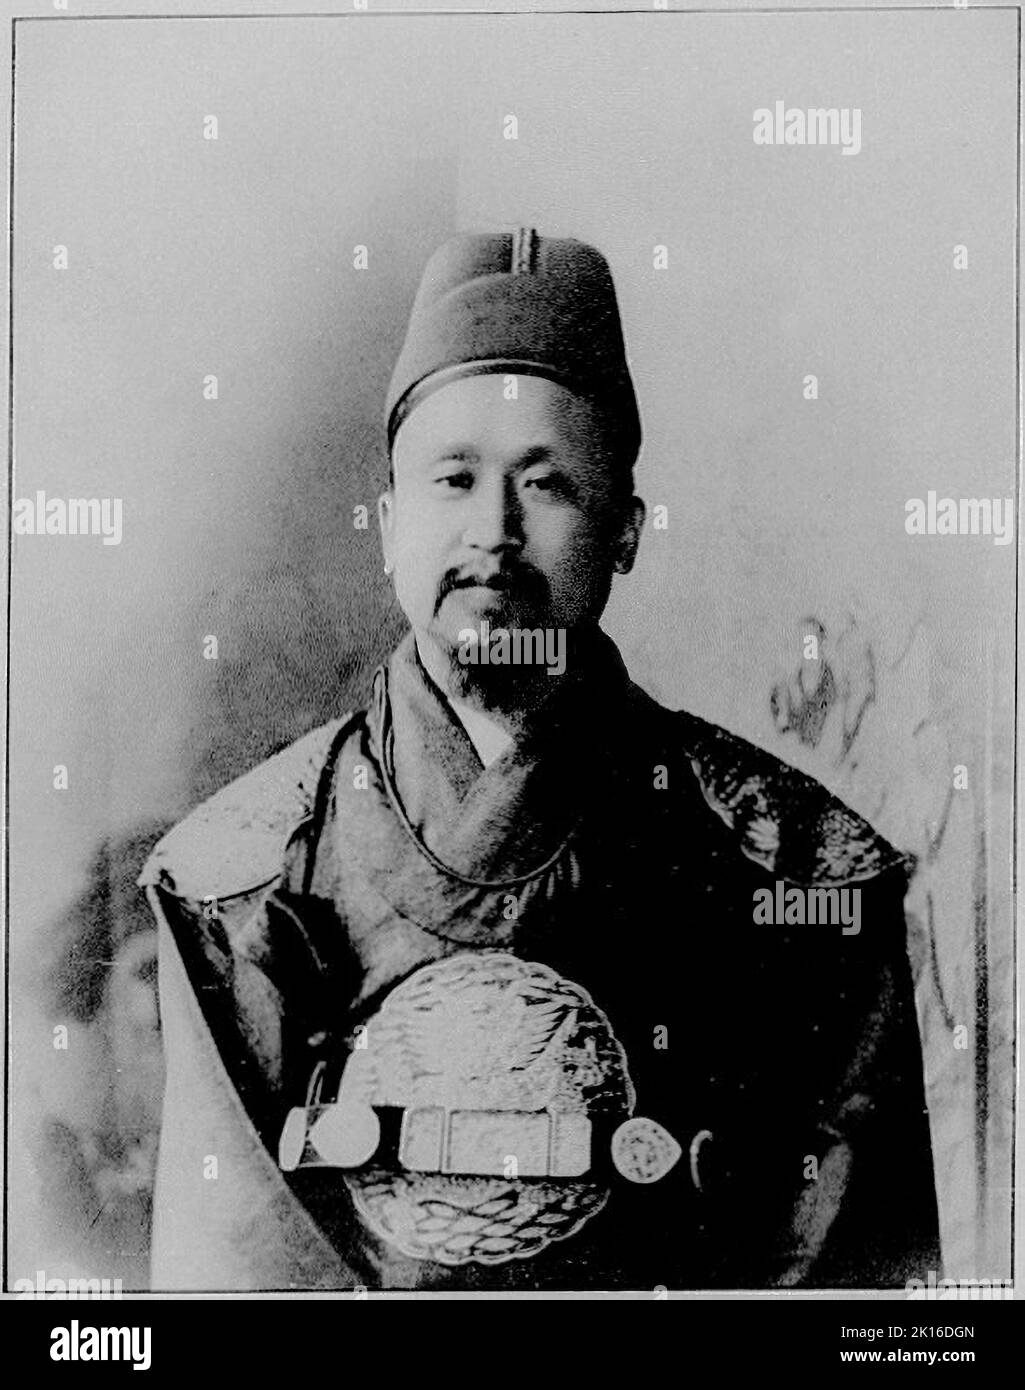 Portrait of Gojong of Korea (1852 – 1919), the last King of Joseon from 1864 to 1897, and first Emperor of Korean Empire from 1897 to 1907. Stock Photo